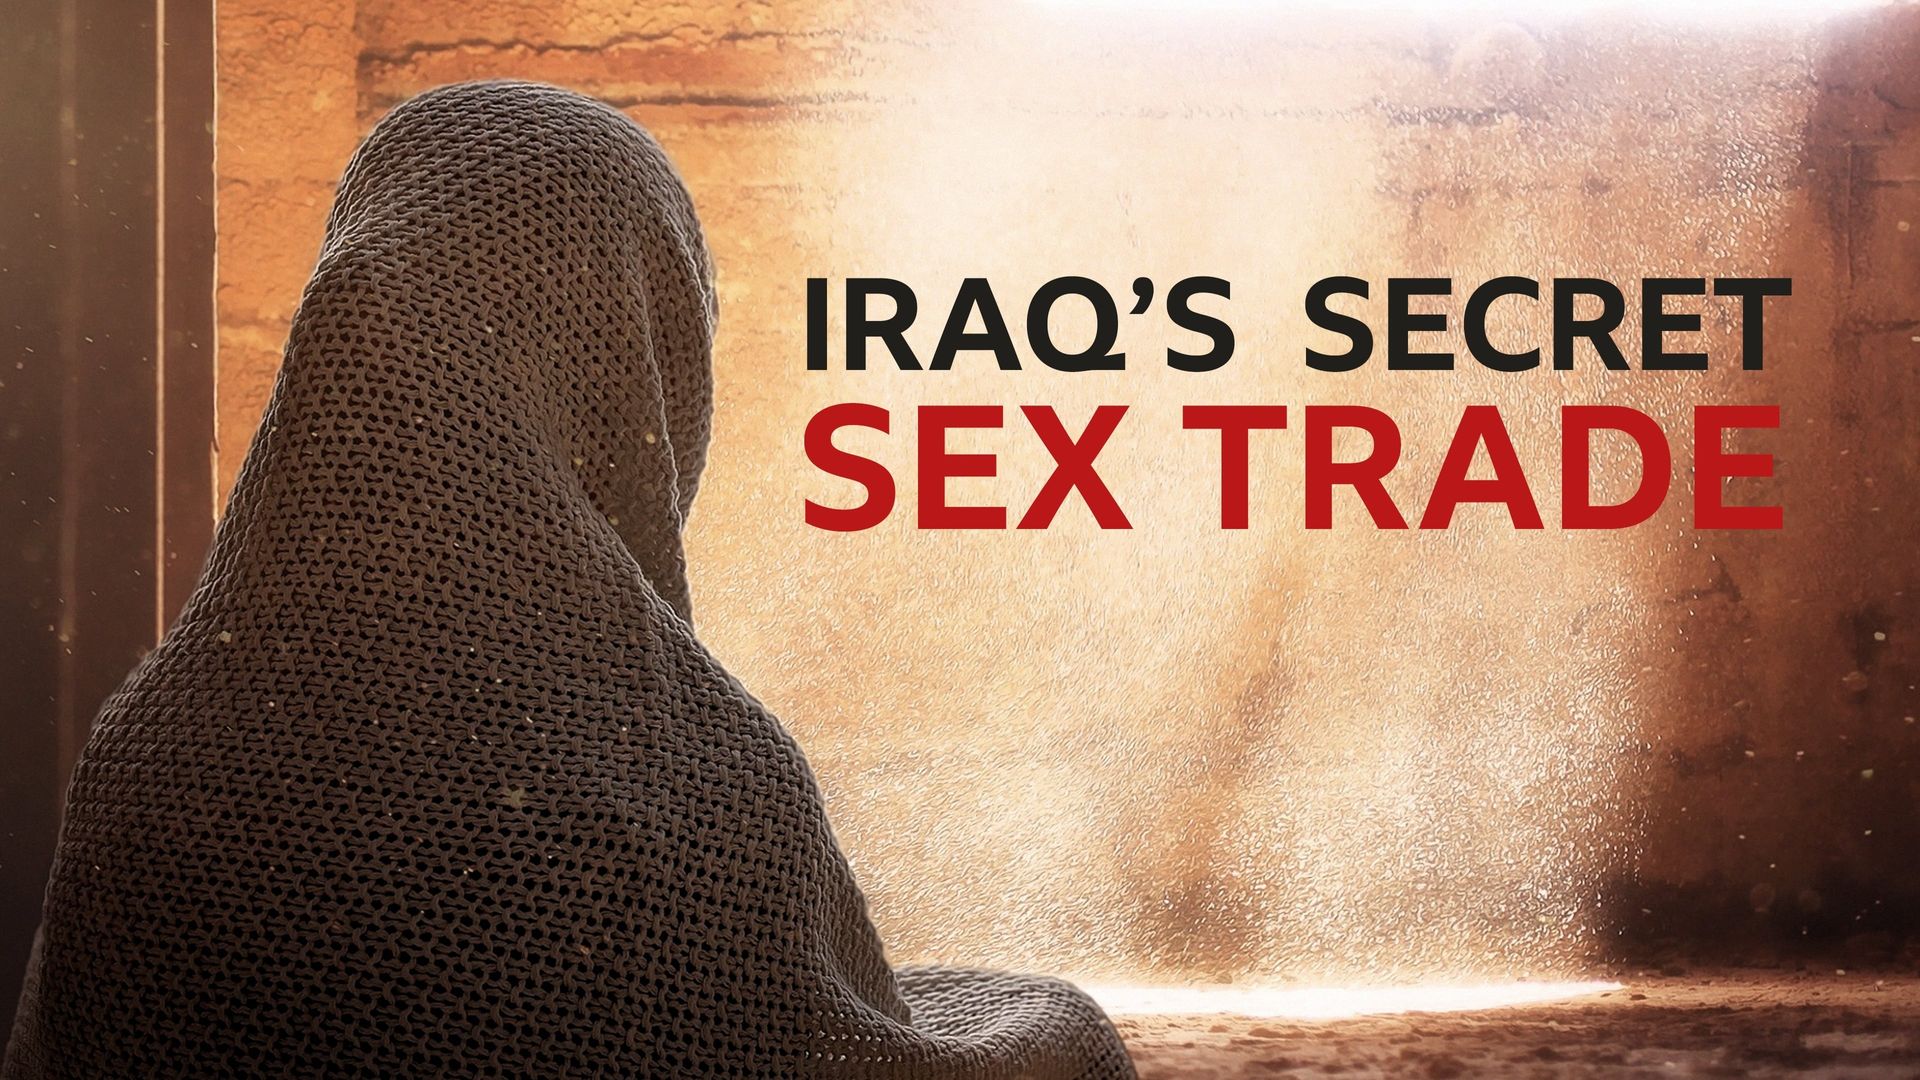 Undercover with the Clerics: Iraq's Secret Sex Trade background